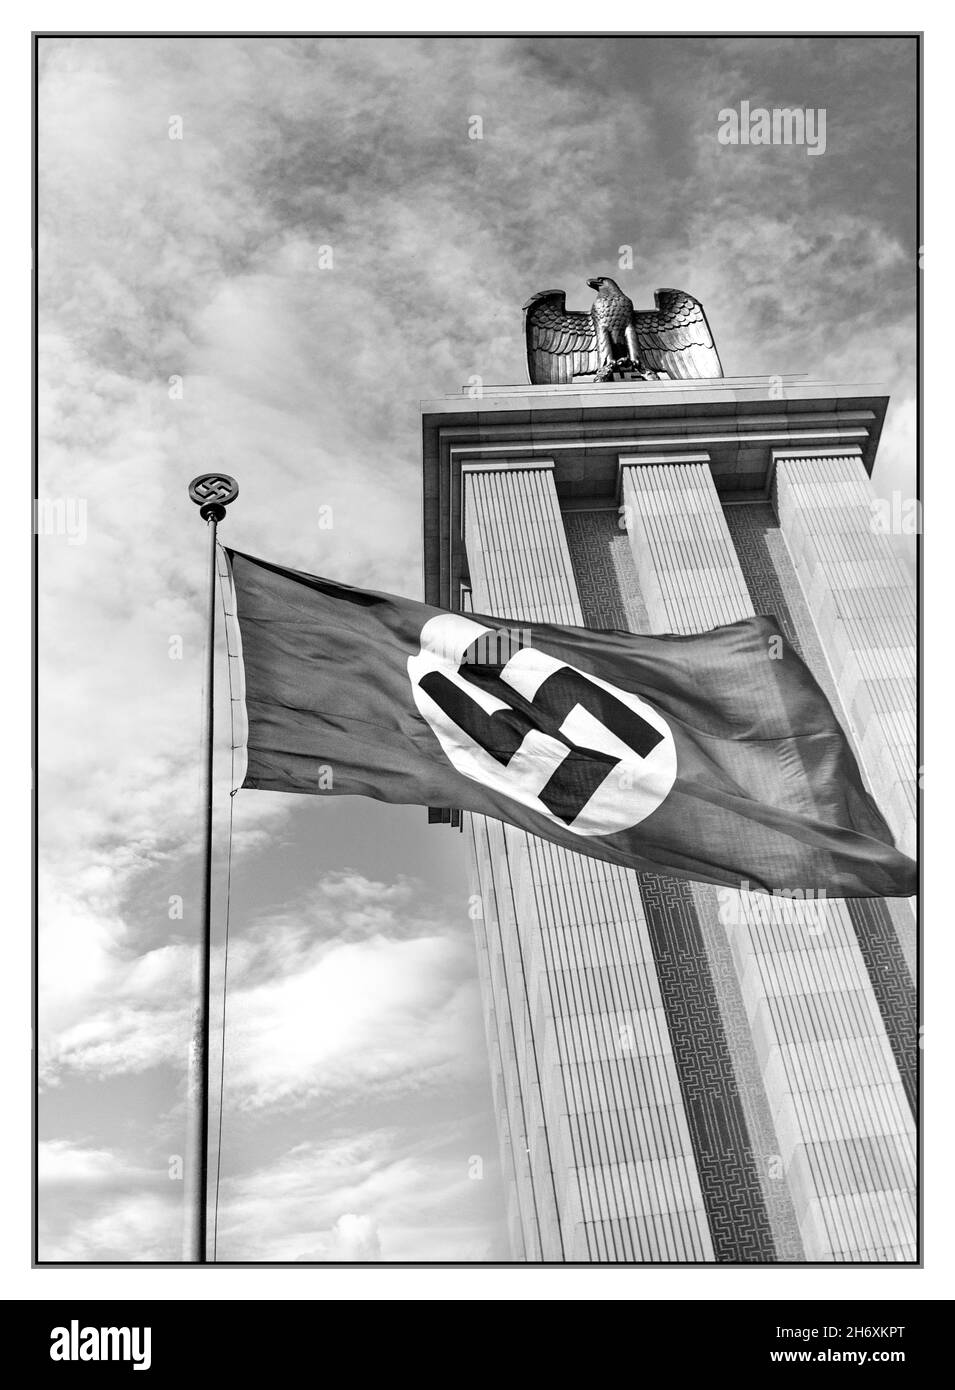 GERMANY 1937 World Exhibition Paris 1937 The German Pavilion with German eagle and Swastika Flag flying at the Paris World Exhibition France The Exposition Internationale des Arts et Techniques dans la Vie Moderne (International Exposition of Art and Technology in Modern Life) was held from 25 May to 25 November 1937 in Paris, France Albert Speer's pavilion was culminated by a tall tower crowned with the symbols of the Nazi state: an eagle and the swastika. The pavilion was conceived as a monument to 'German pride and achievement'. Stock Photo